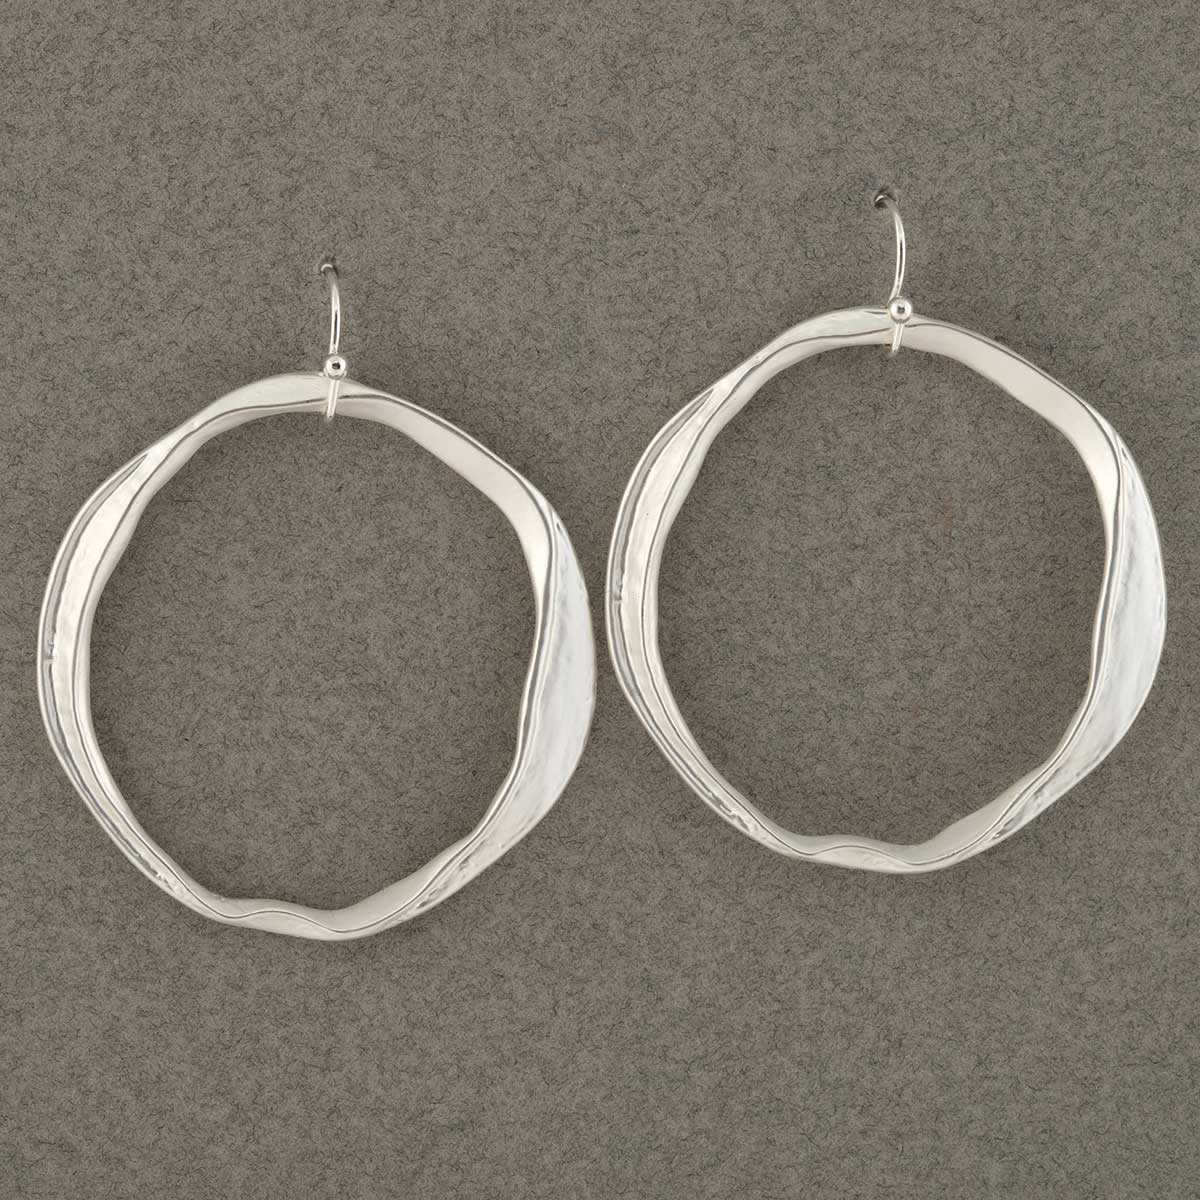 Satin Hammered Silver Hoop French Wire Earrings 1.5"